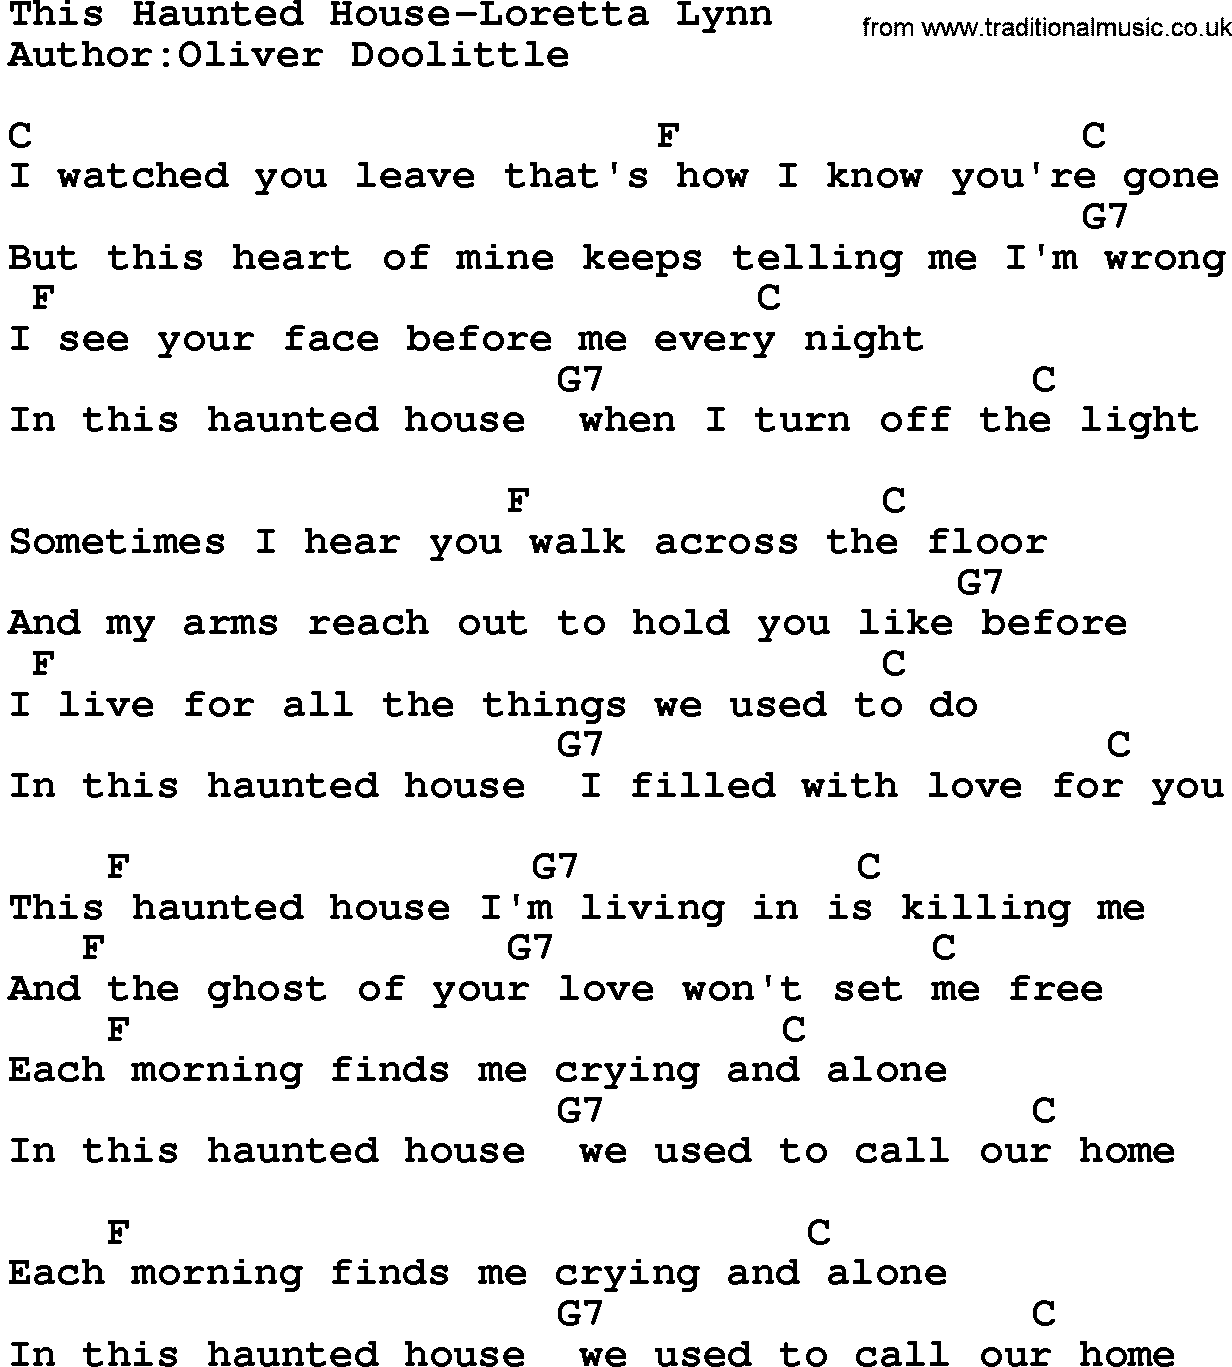 Country music song: This Haunted House-Loretta Lynn lyrics and chords